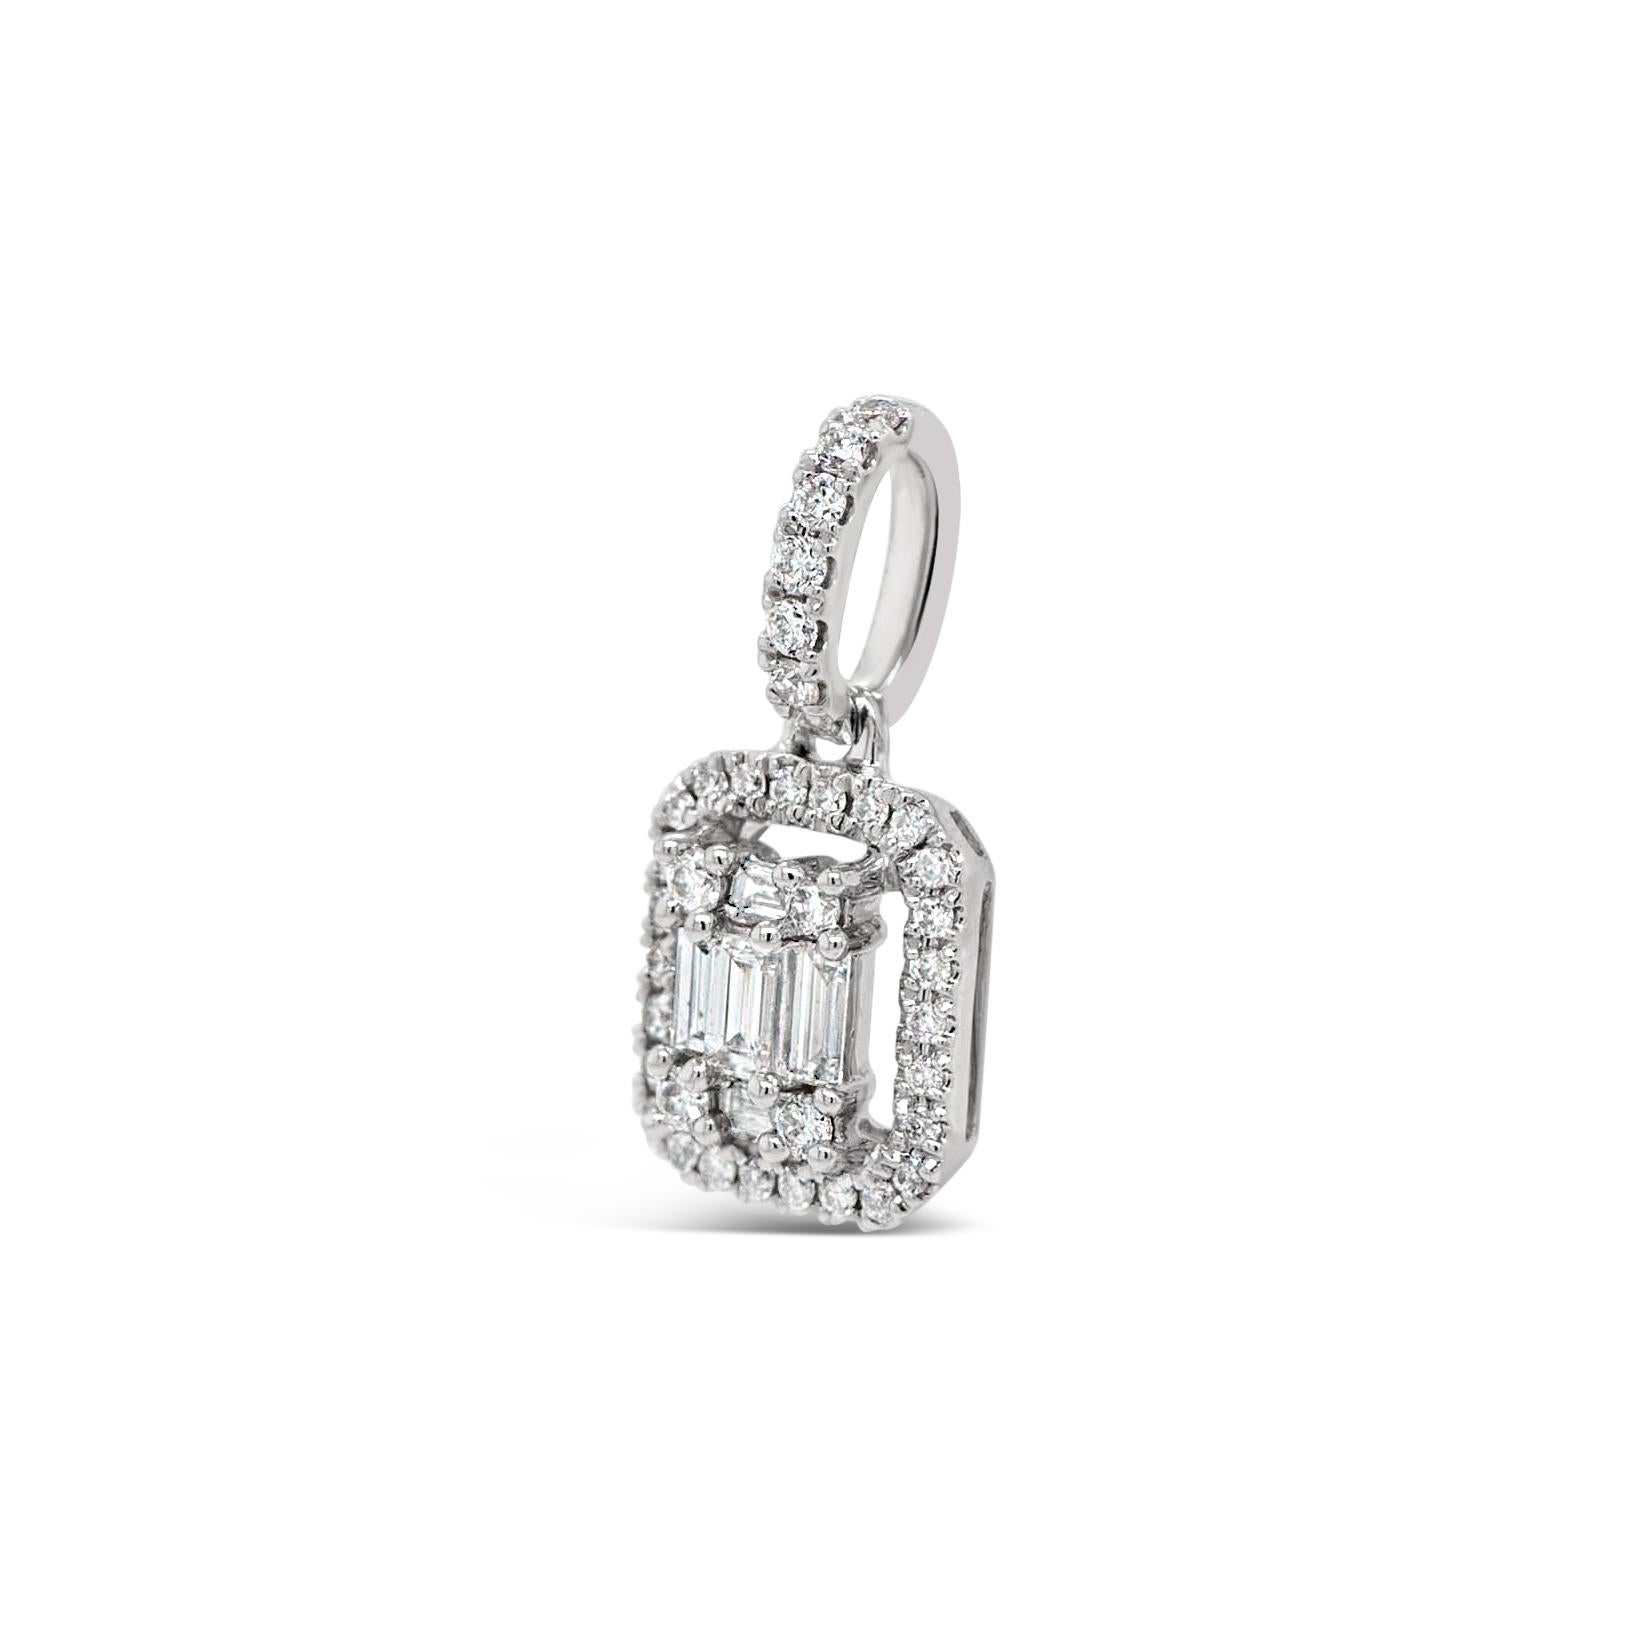 Many of our items include UK VAT at 20%. This means we may be able to remove this when you are purchasing from outside of the UK. Please message us if you would like to know about a specific item.
Material: 18ct White Gold
Total Pendant Height: